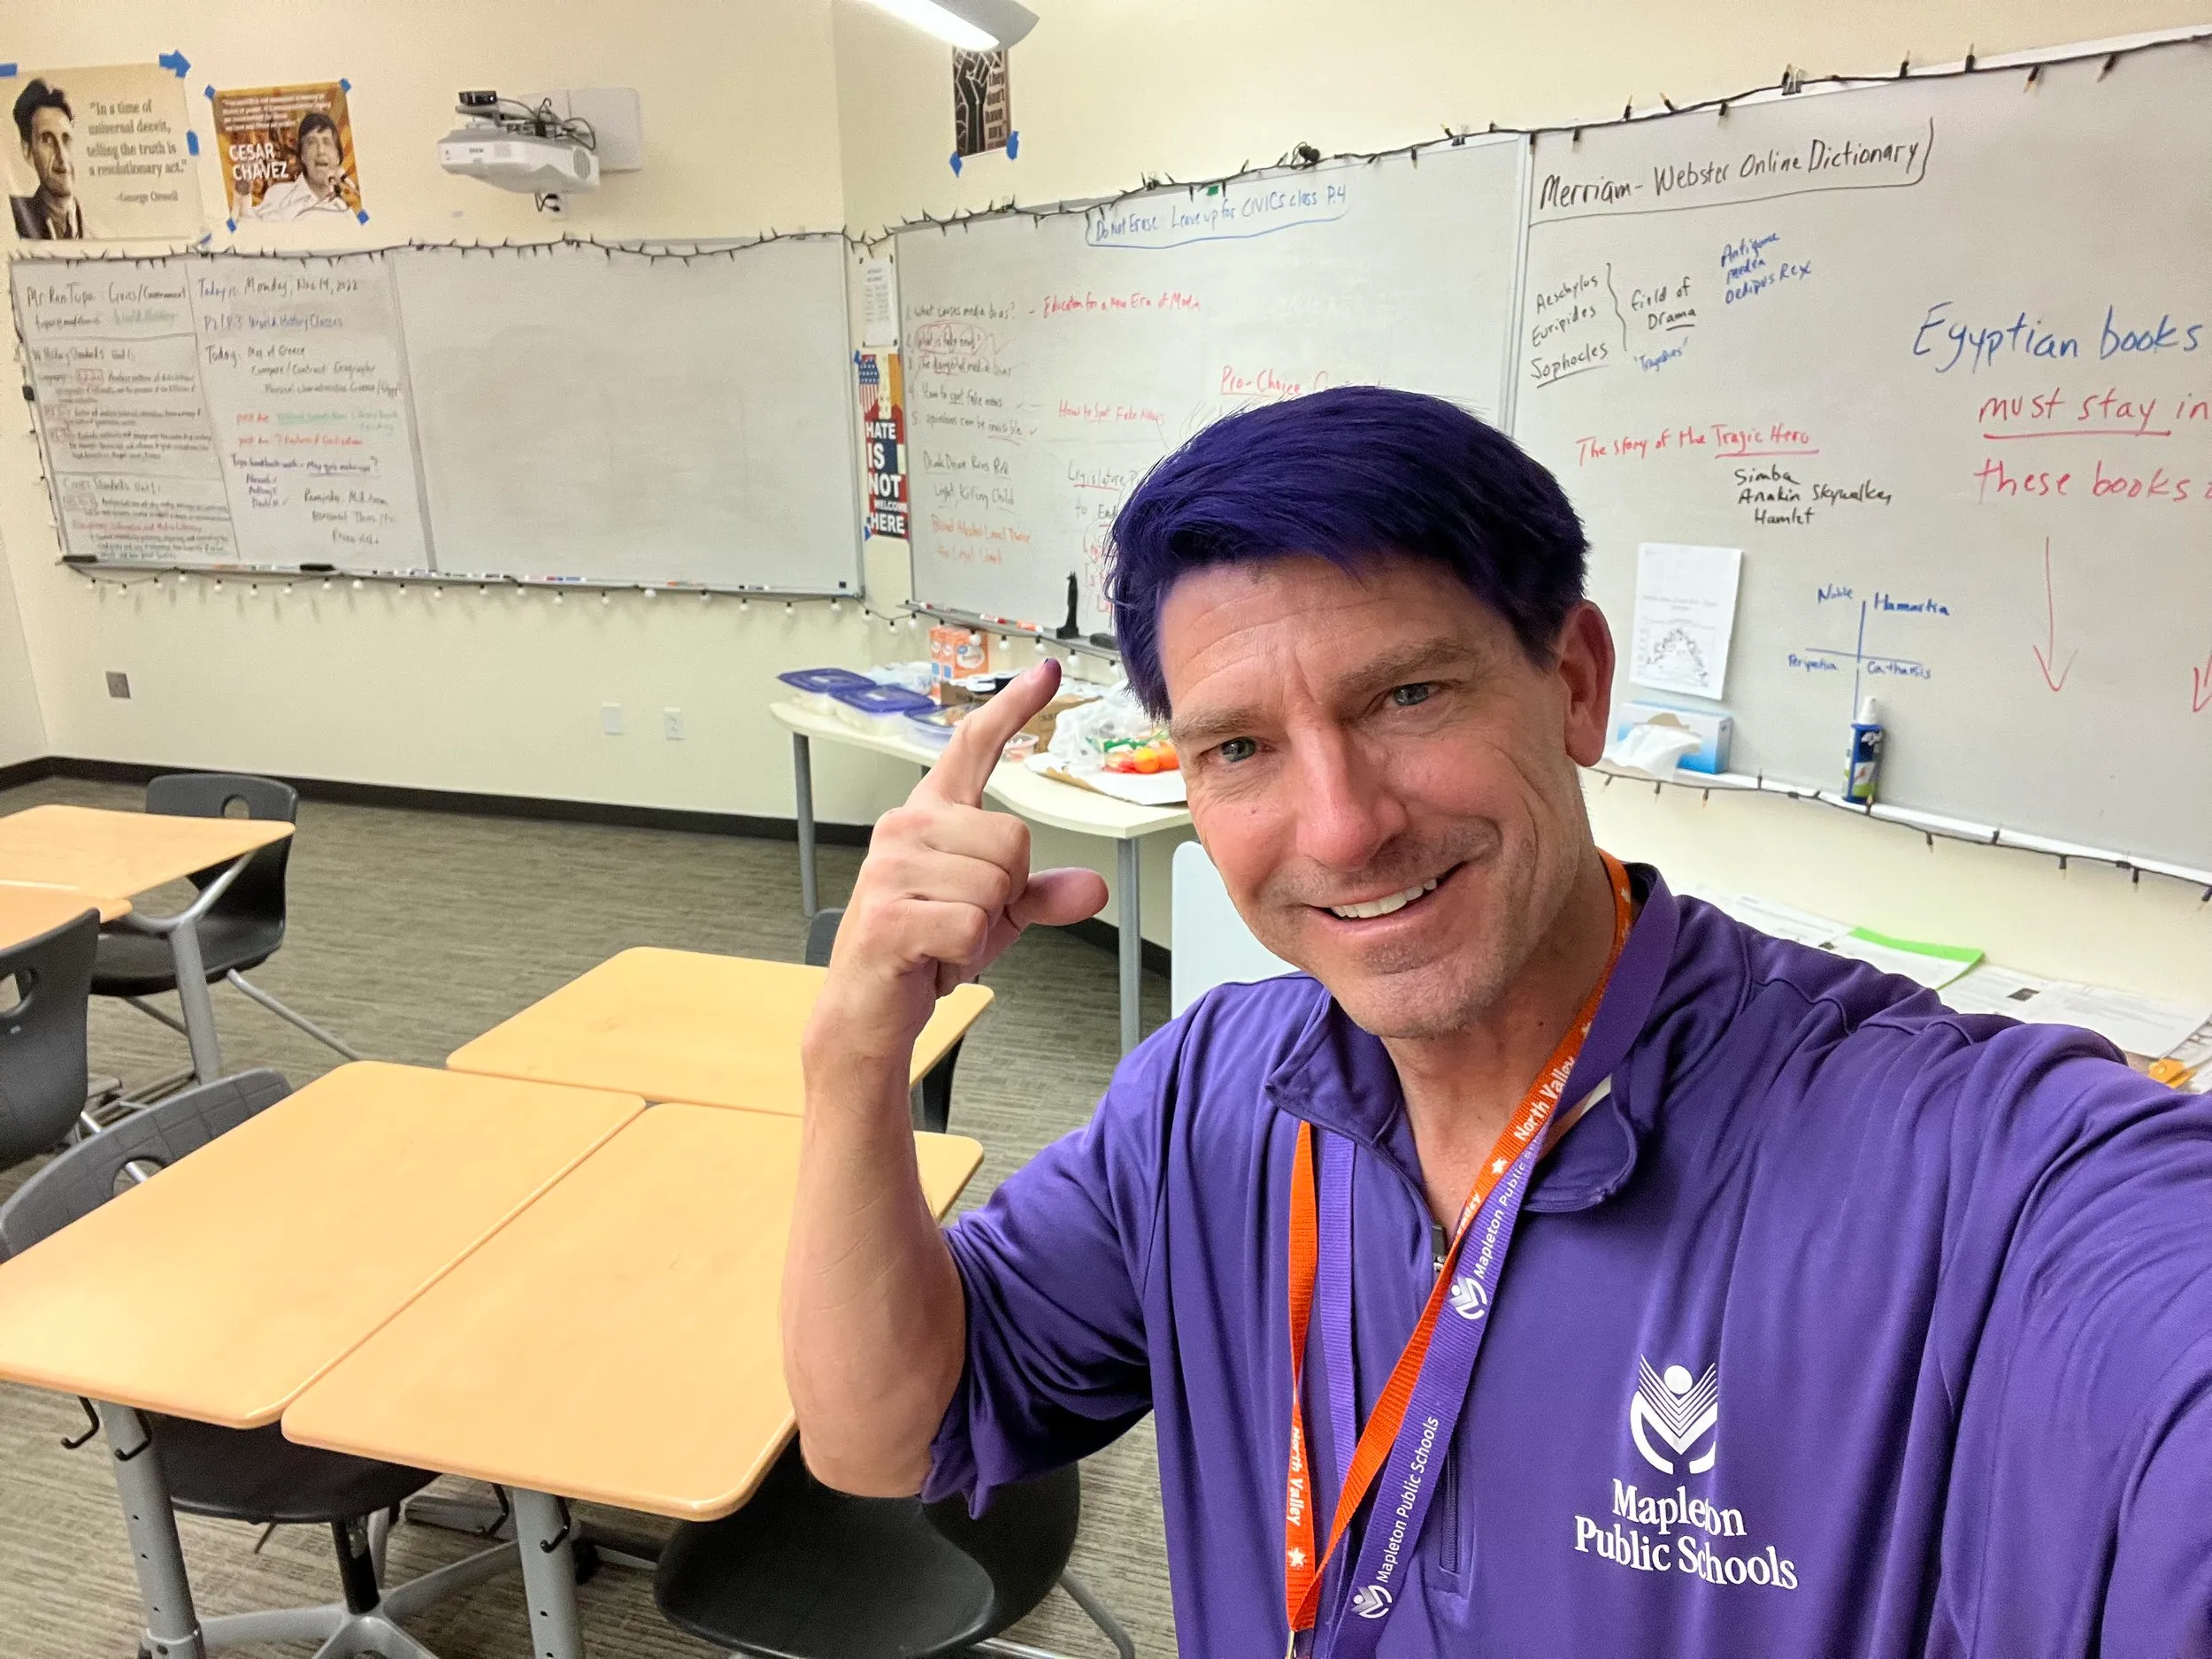 Ron Tupa with his hair dyed purple to support Mapleton Public School District.